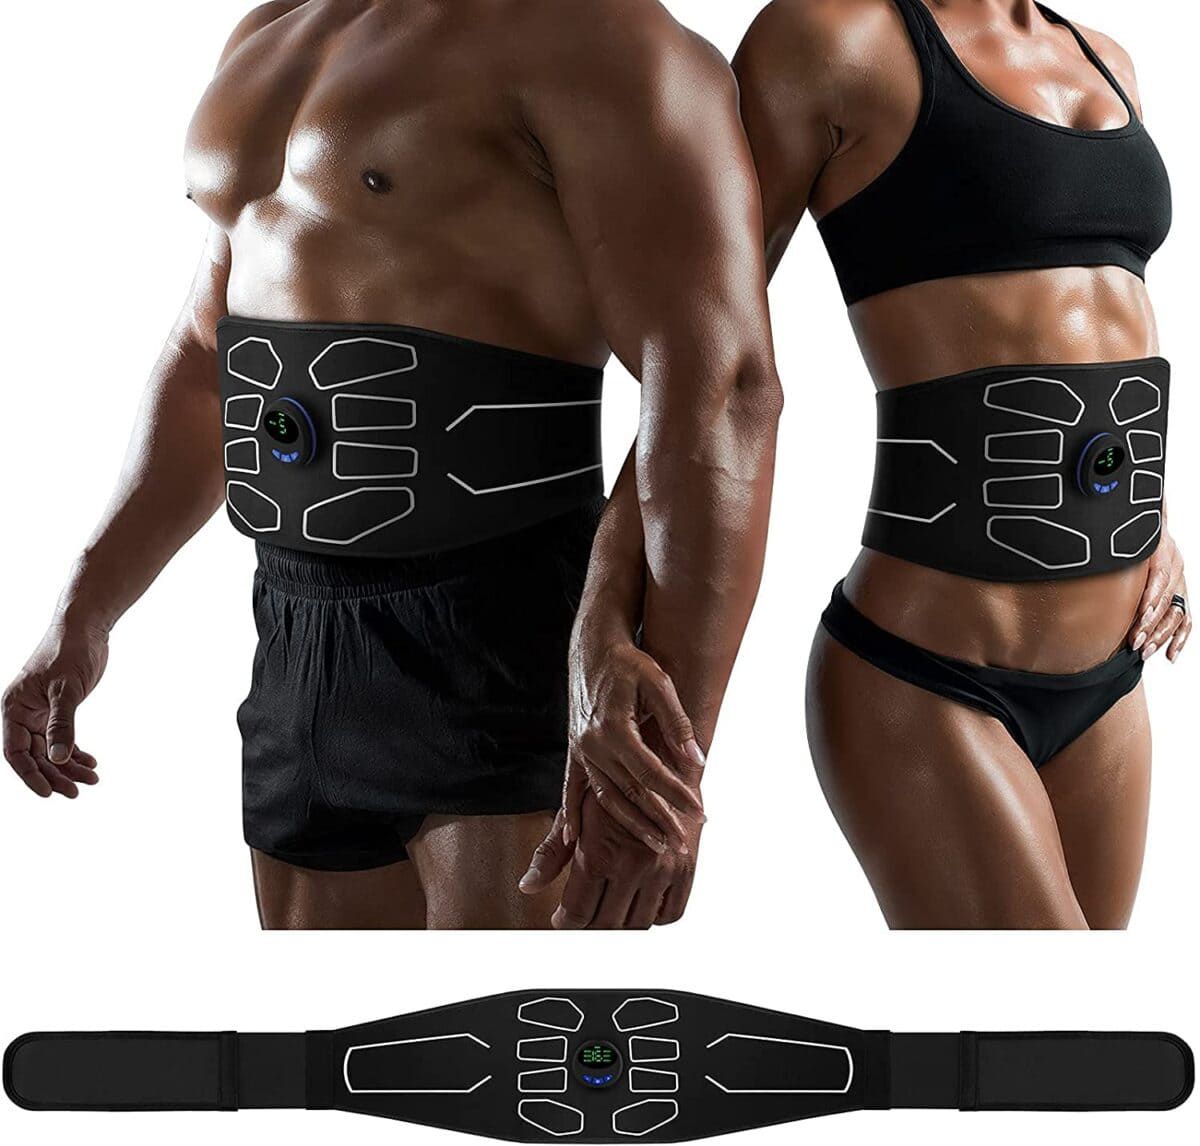 Labor Day Sale: Get 15% Off the MarCoolTrip MZ-4 Abdominal Muscle